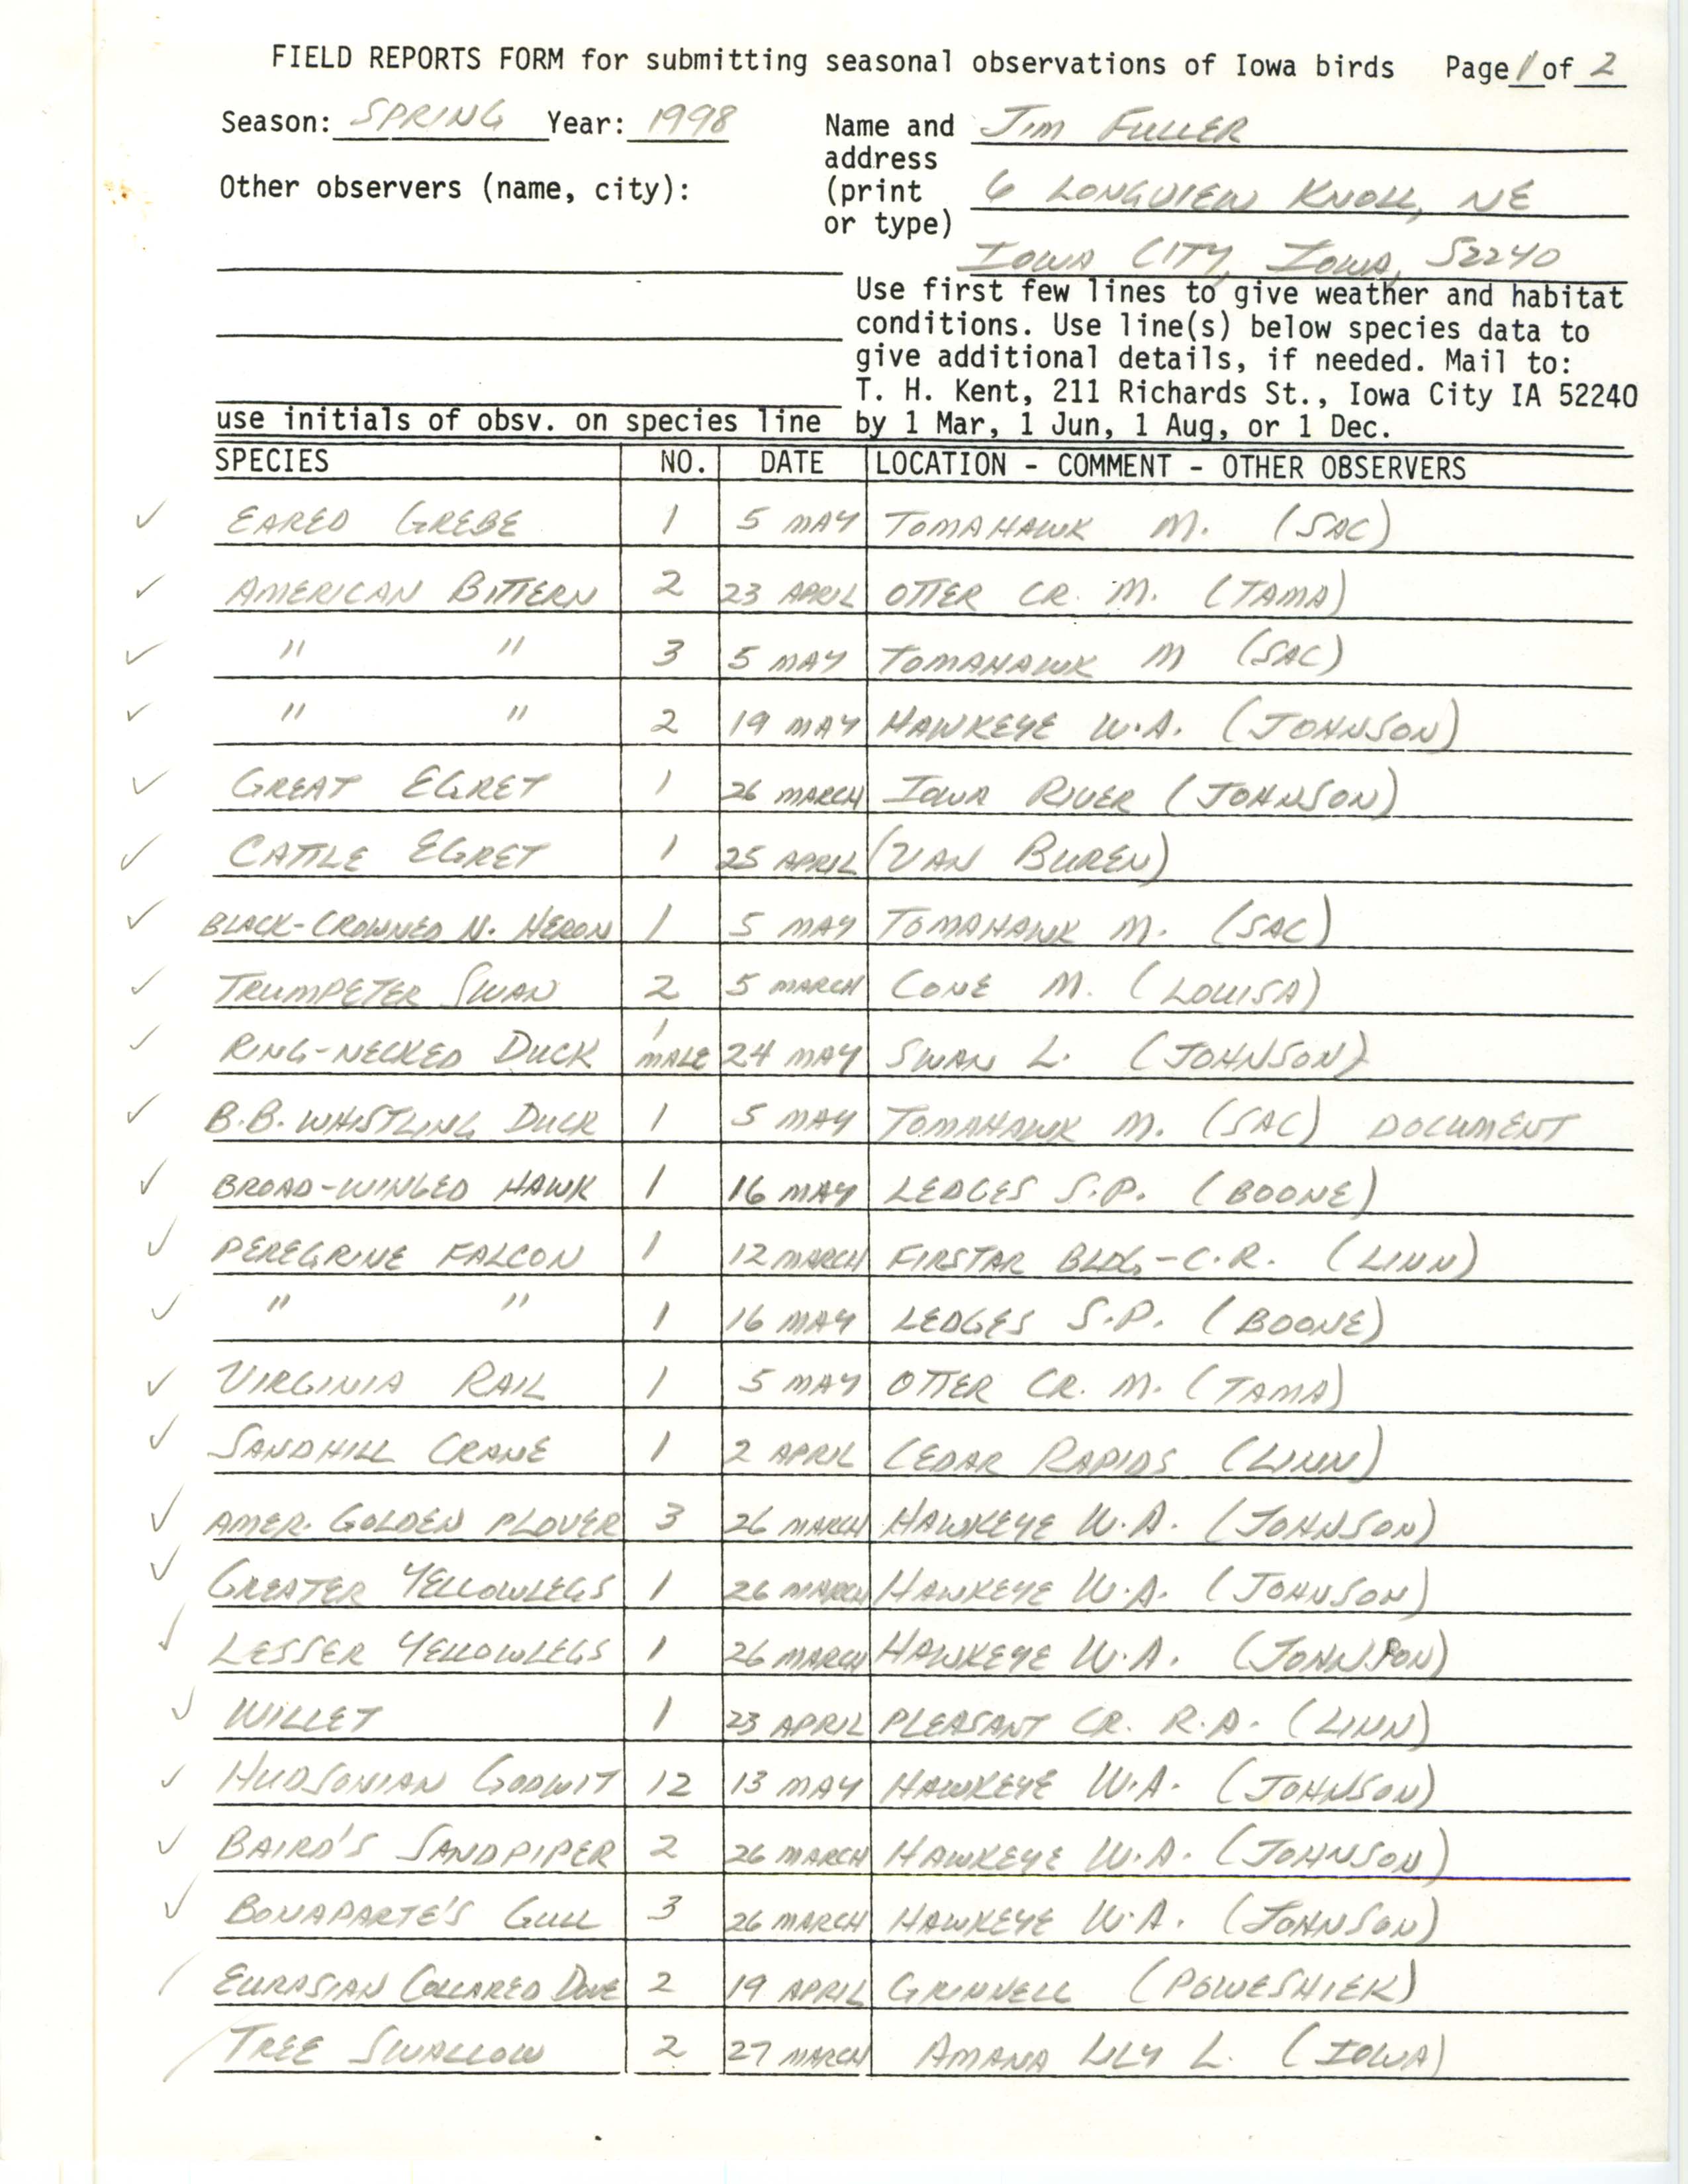 Field reports form for submitting seasonal observations of Iowa birds, Jim Fuller, spring 1998